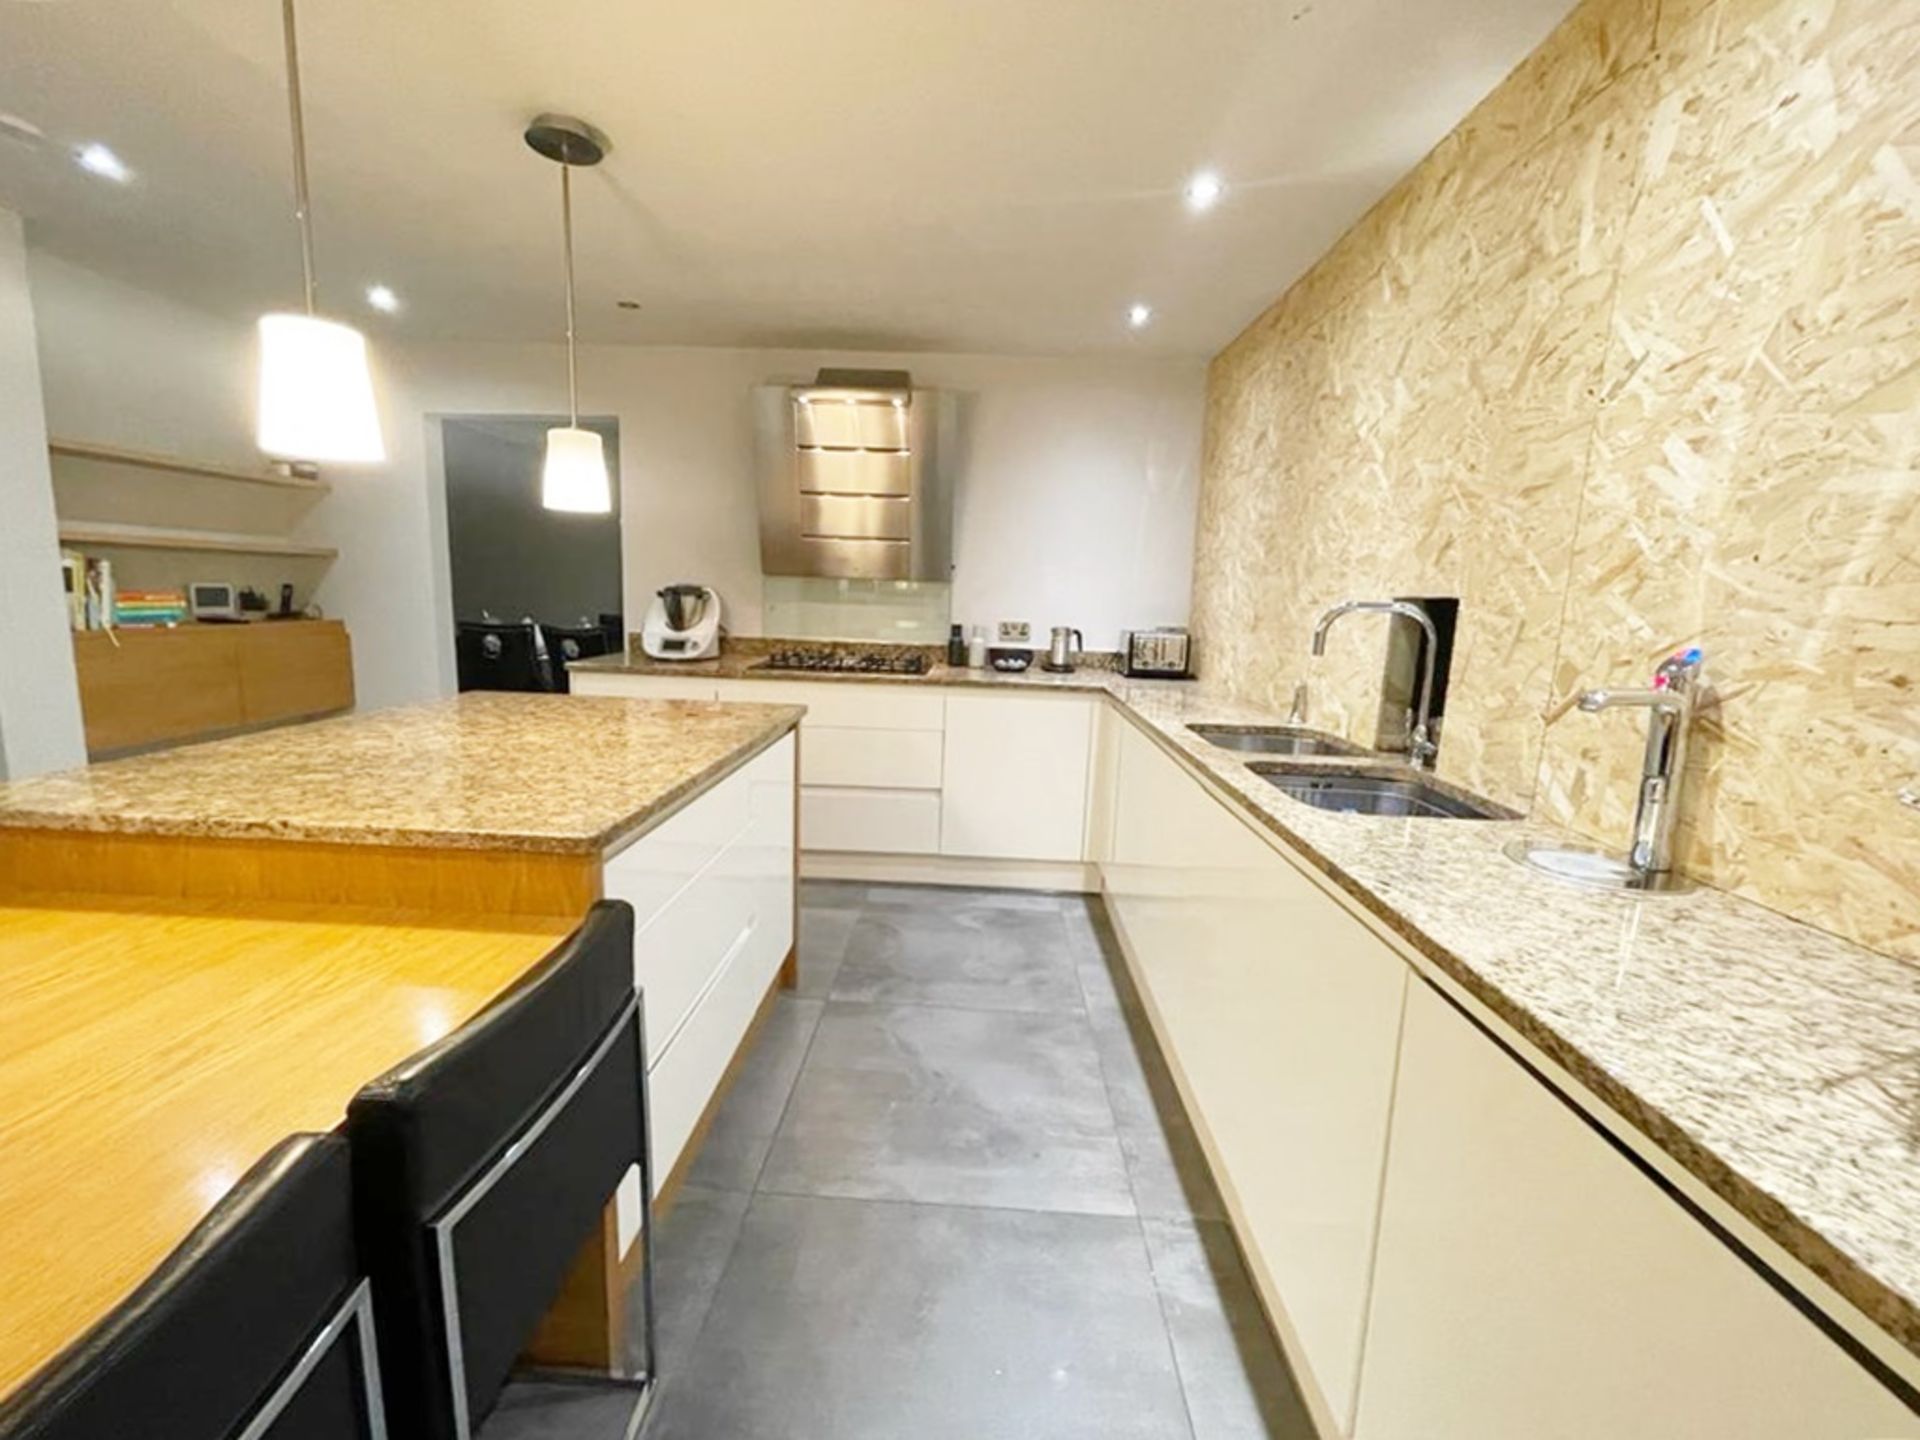 1 x Stunning PARAPAN Handleless Fitted Kitchen with Neff Appliances, Granite Worktops & Island - Image 126 of 126